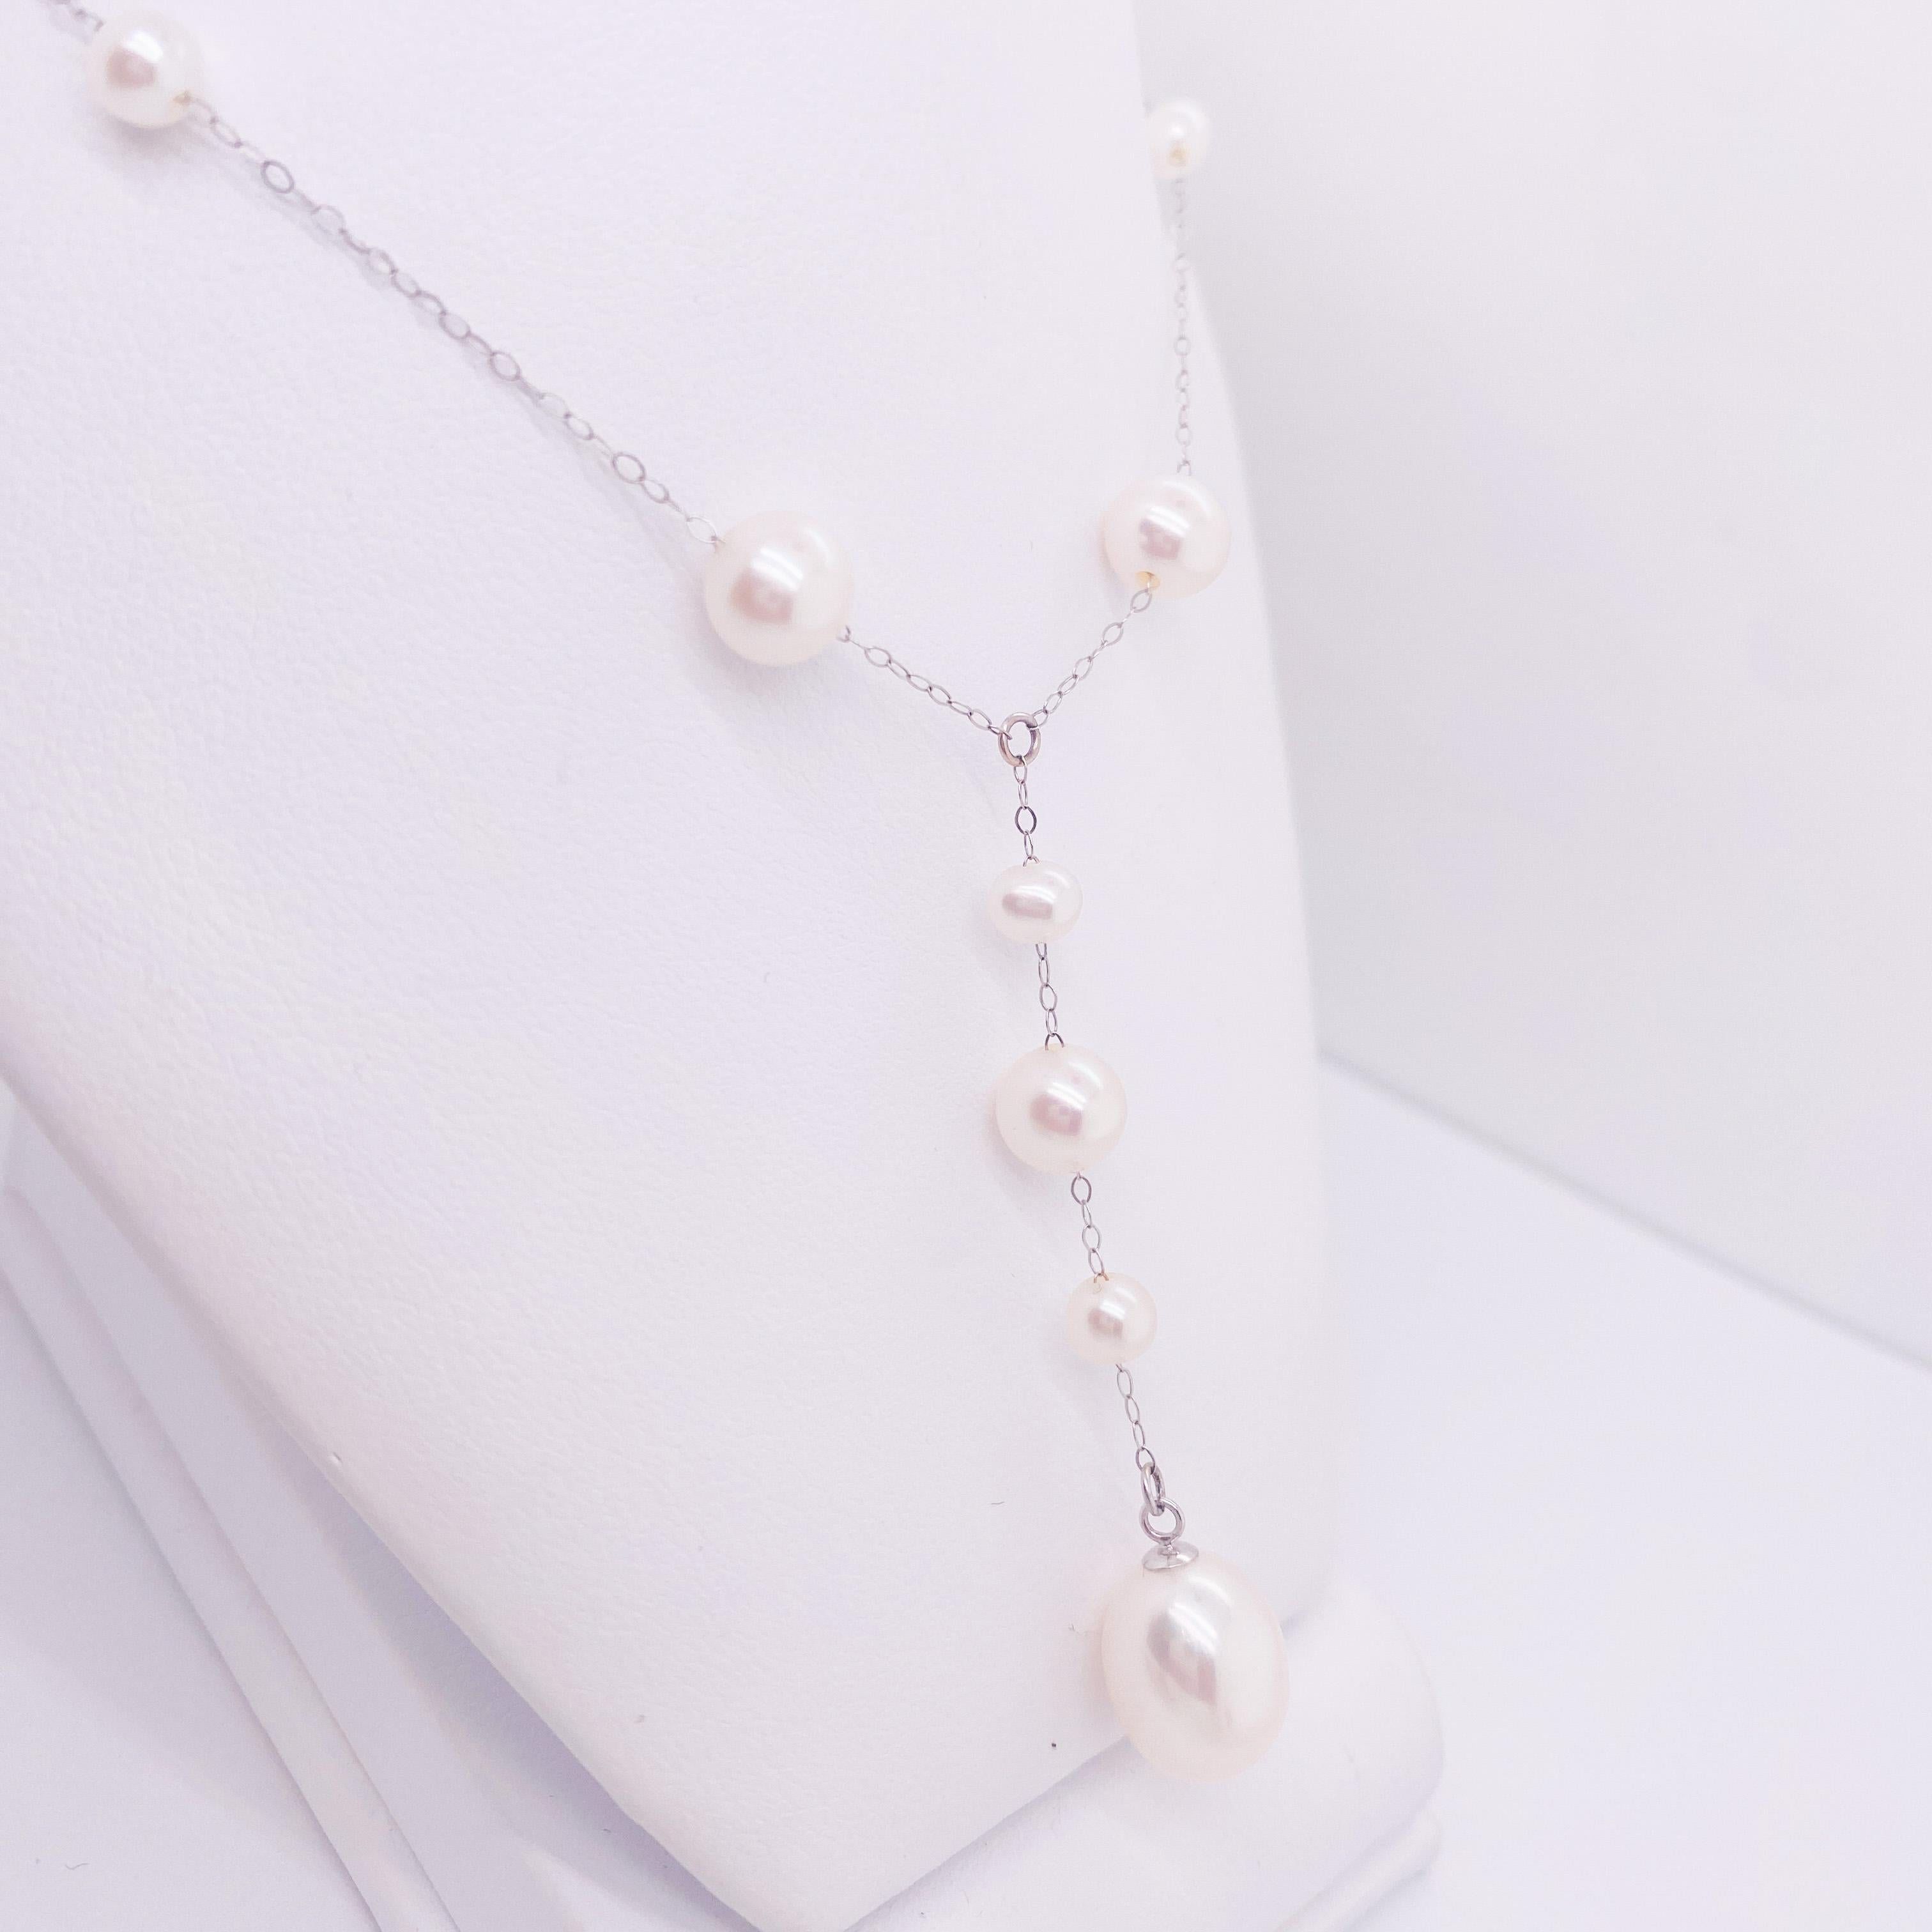 This pearl drop necklace is a lovely and bright look, especially for a wedding! The elegant dance of alternating size pearls down the length of chain is delightful. The drop at the center of the chain hangs 2.25 inches down and creates a lovely